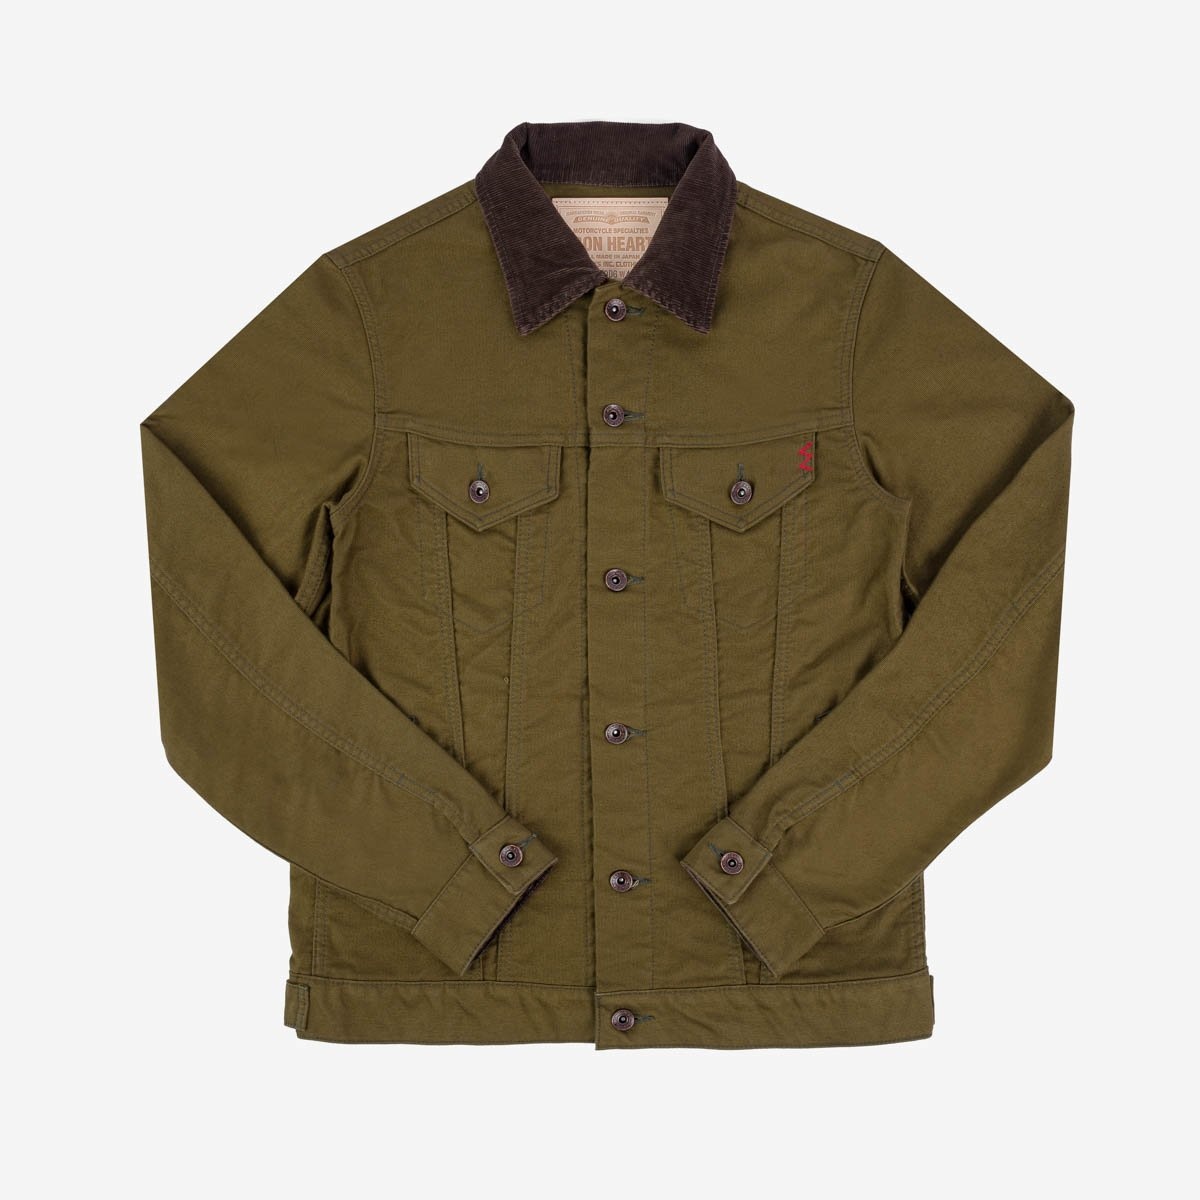 IH-526-ODG 12oz Whipcord Modified Type III Jacket - Olive Drab Green - 1